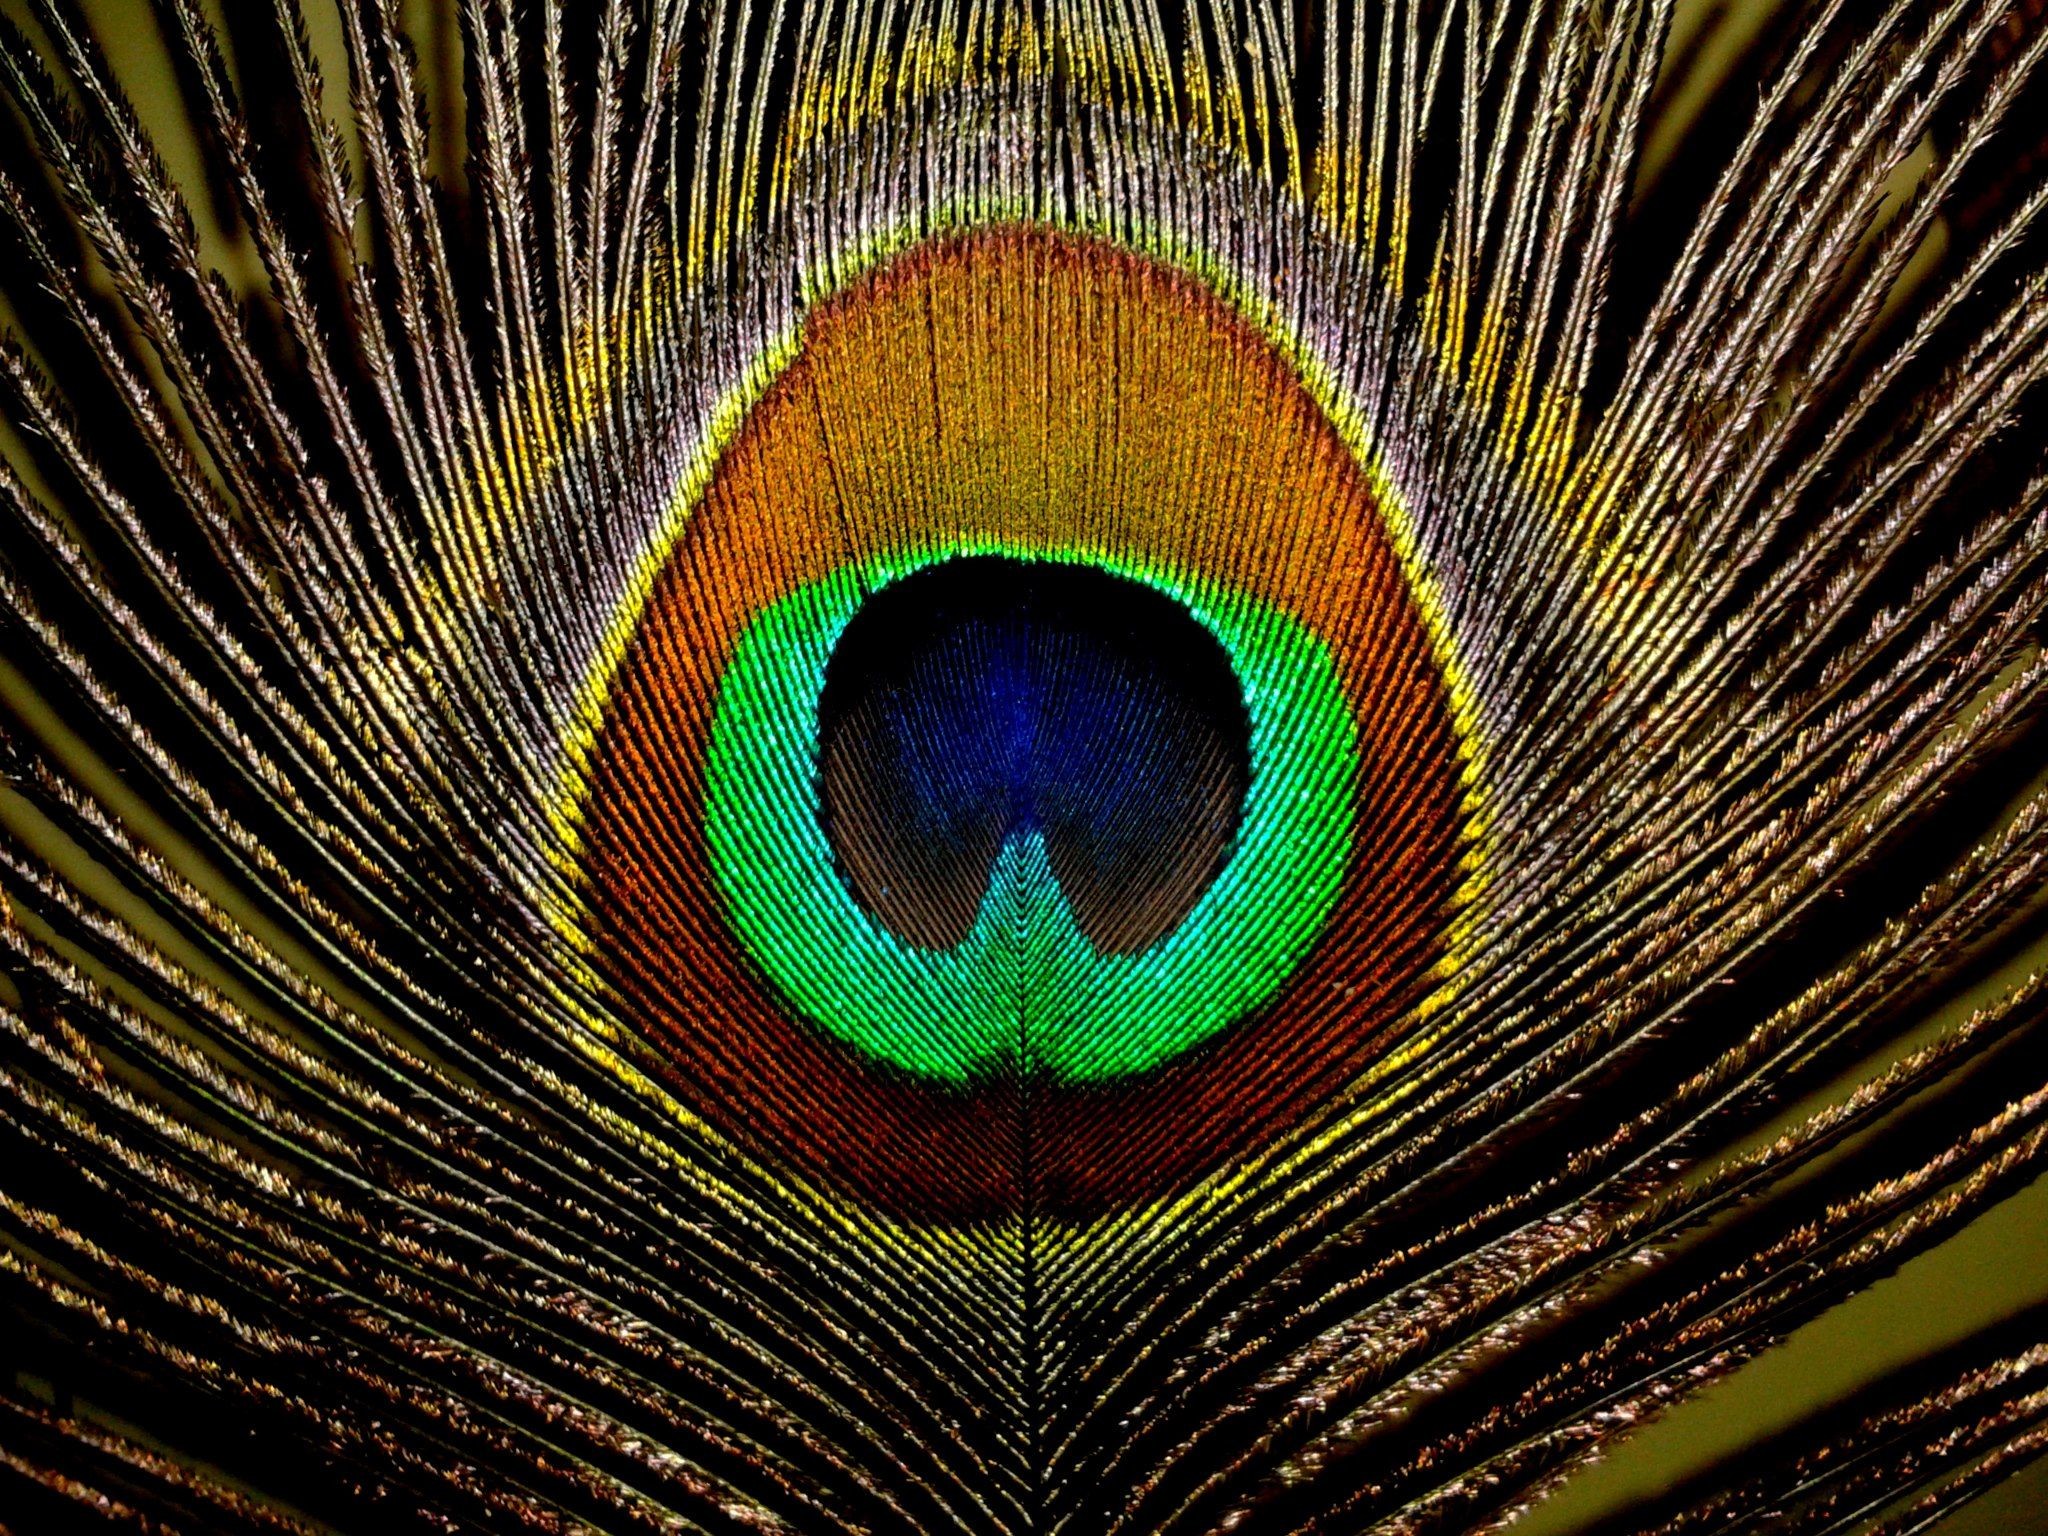 2048x1536 Peacock Feathers HD Wallpapers, Peacock Feathers BackgroundsNew .